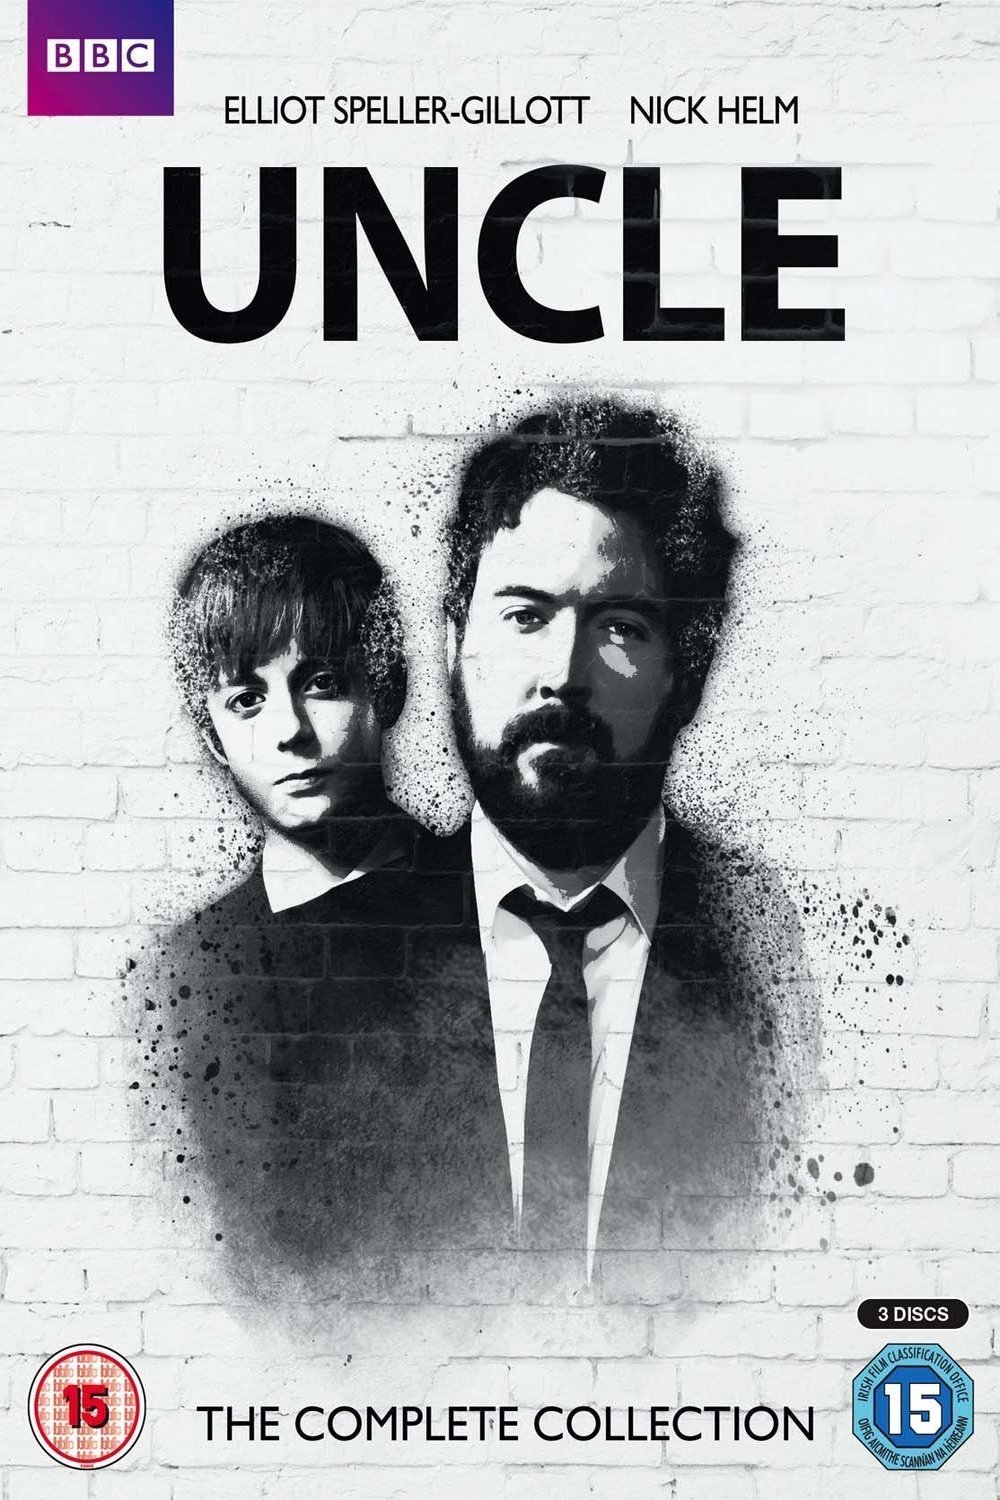 Poster of the movie Uncle